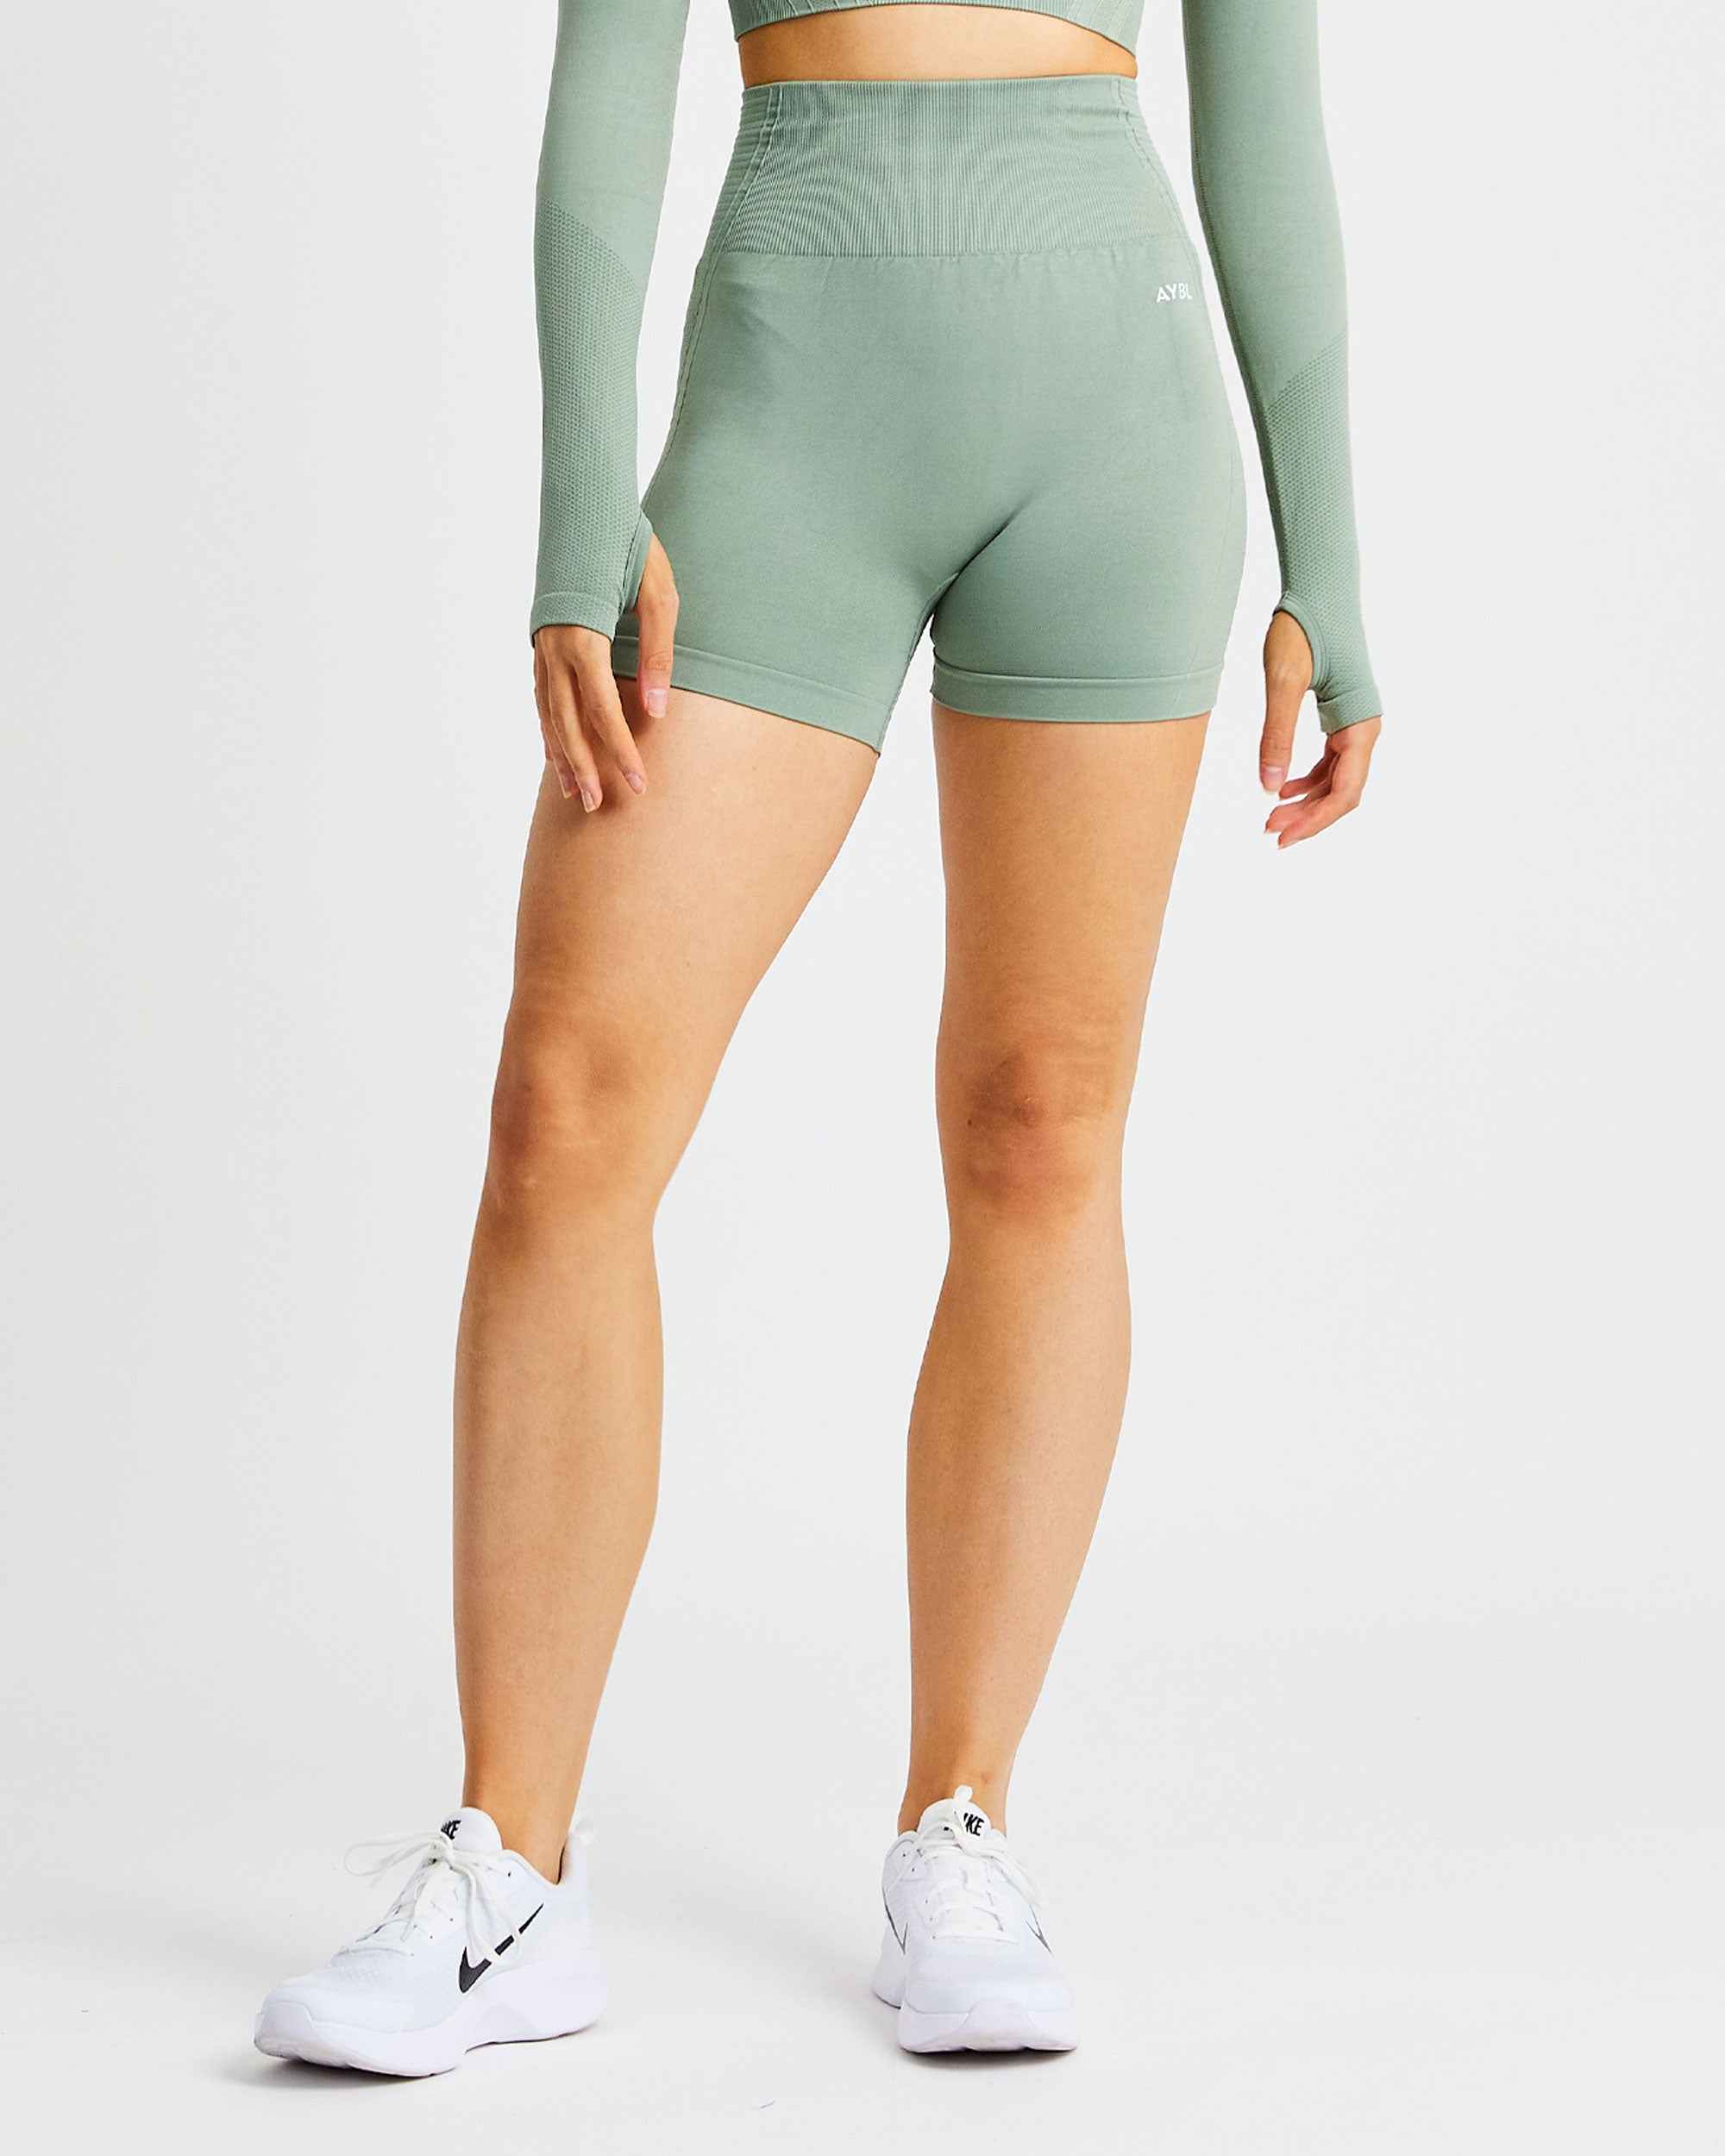 AYBL Balance V2 Seamless Shorts Pink - $25 (21% Off Retail) - From Reese